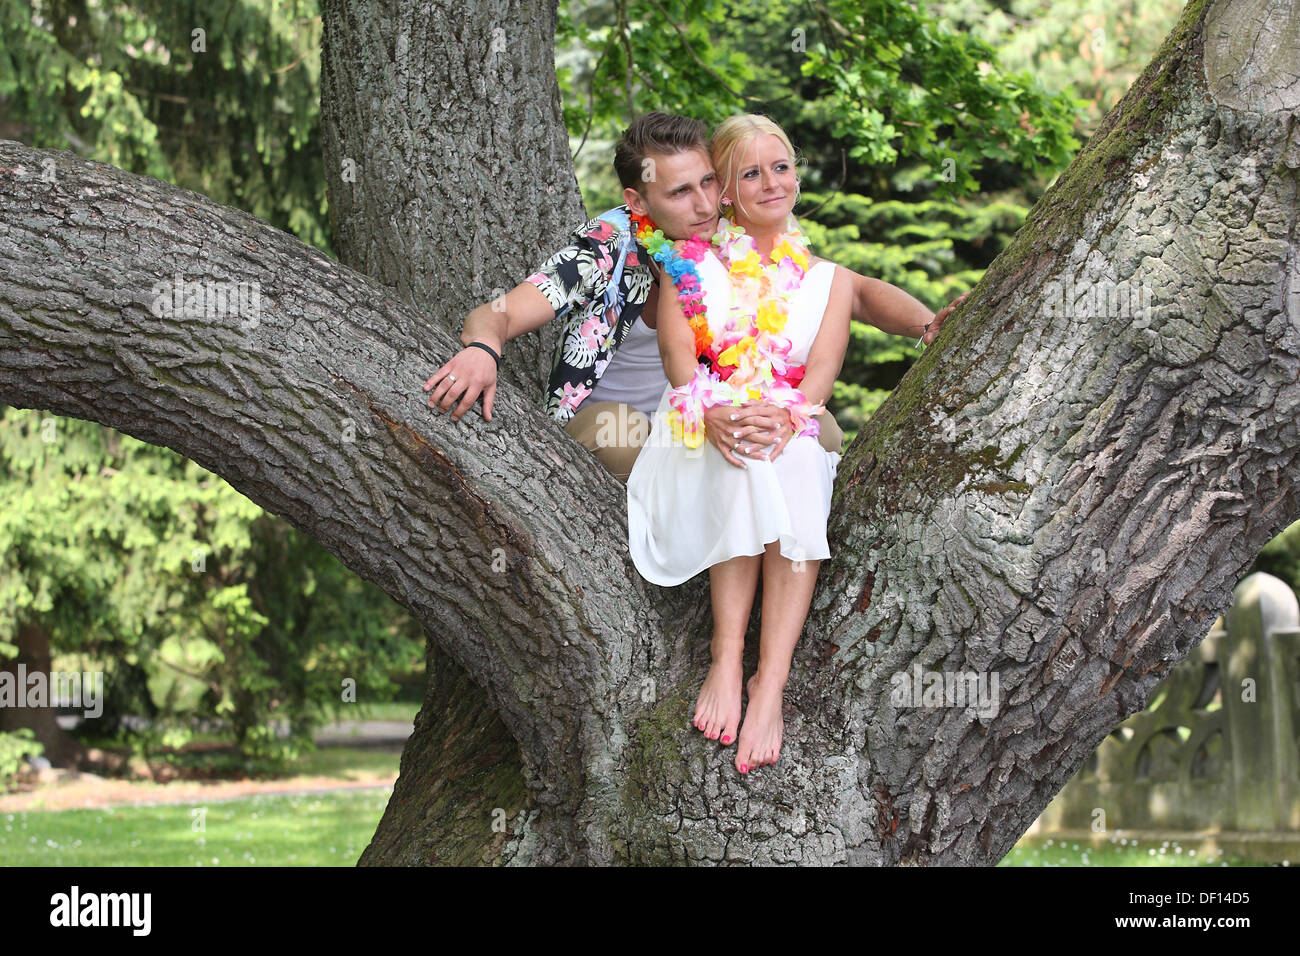 Berlin, Germany, a newlywed bride and groom on a tree Stock Photo